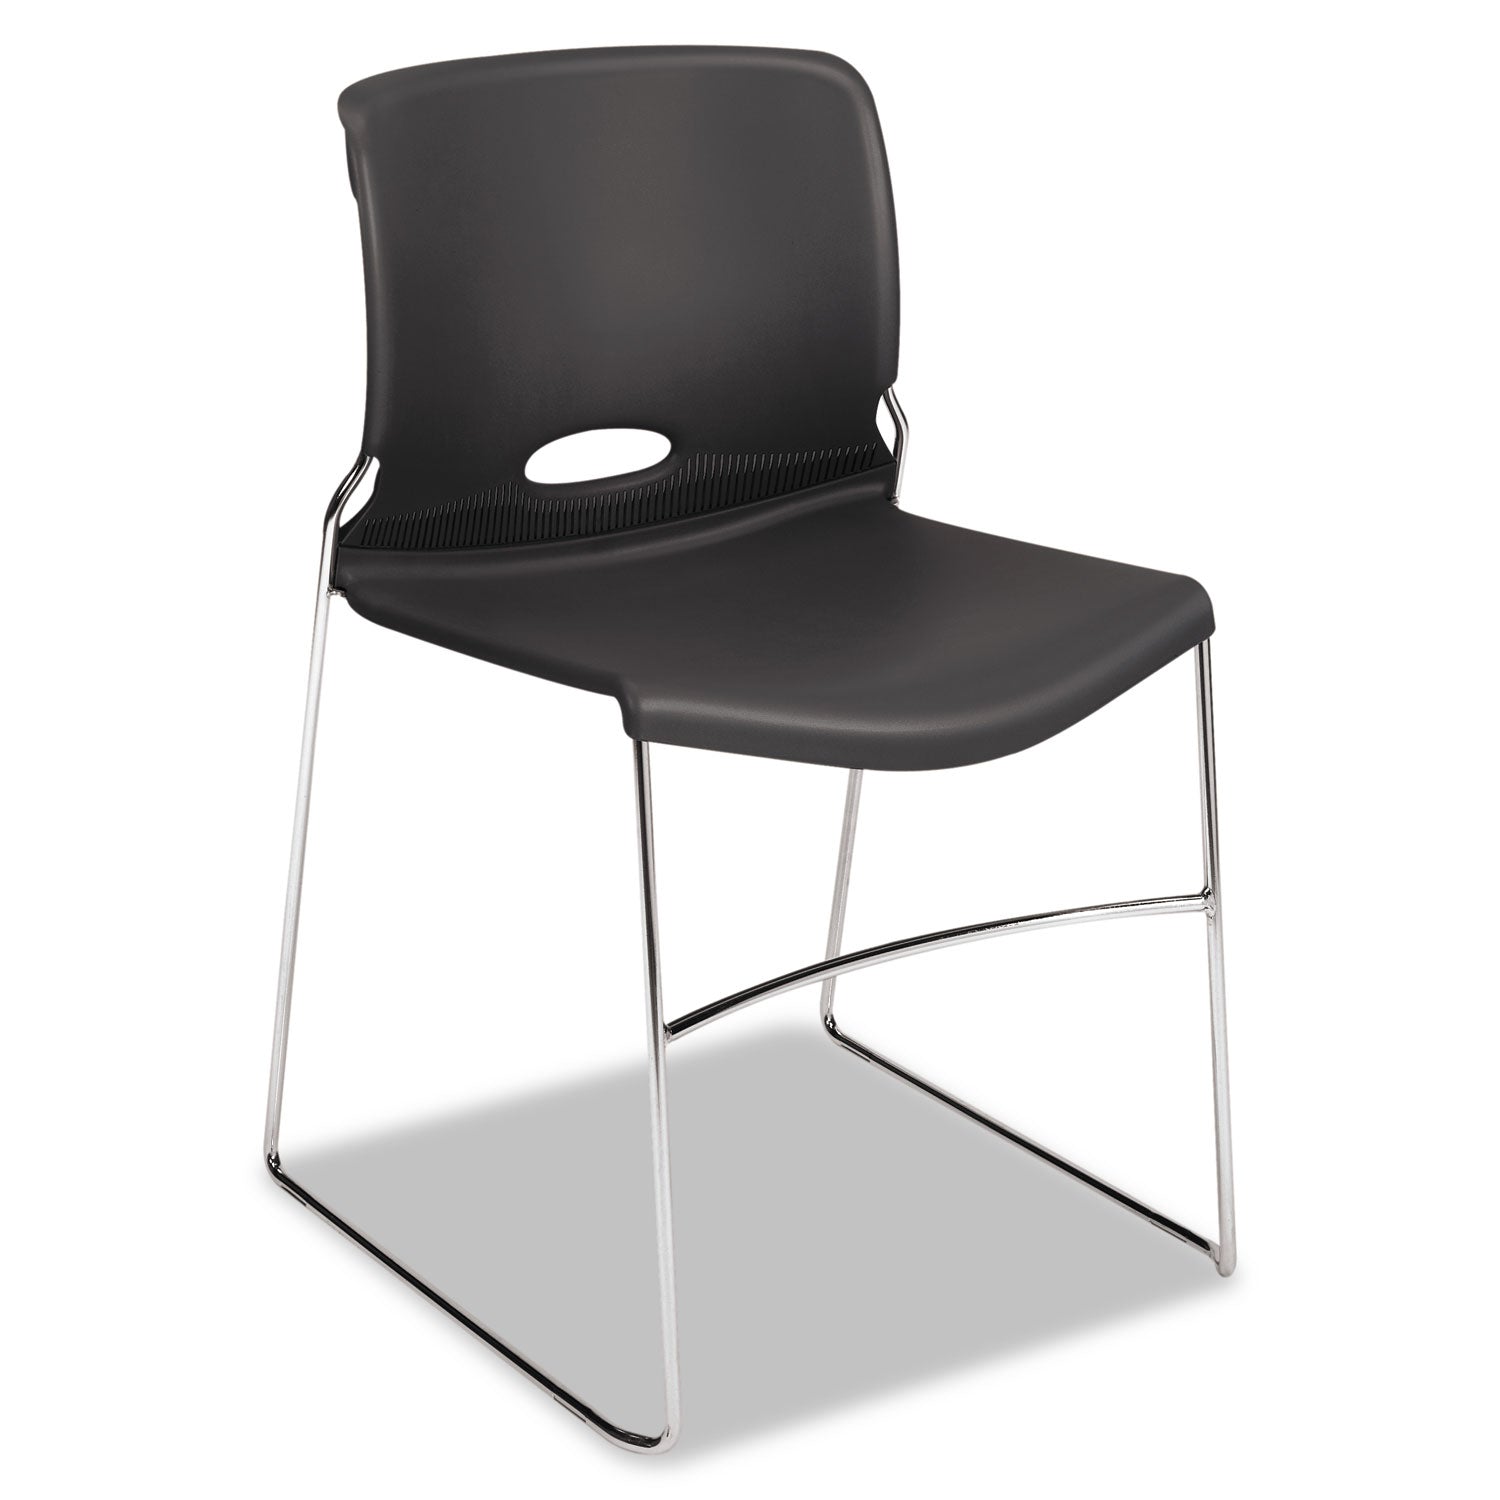 Olson Stacker High Density Chair, Supports Up to 300 lb, 17.75" Seat Height, Lava Seat, Lava Back, Chrome Base, 4/Carton - 